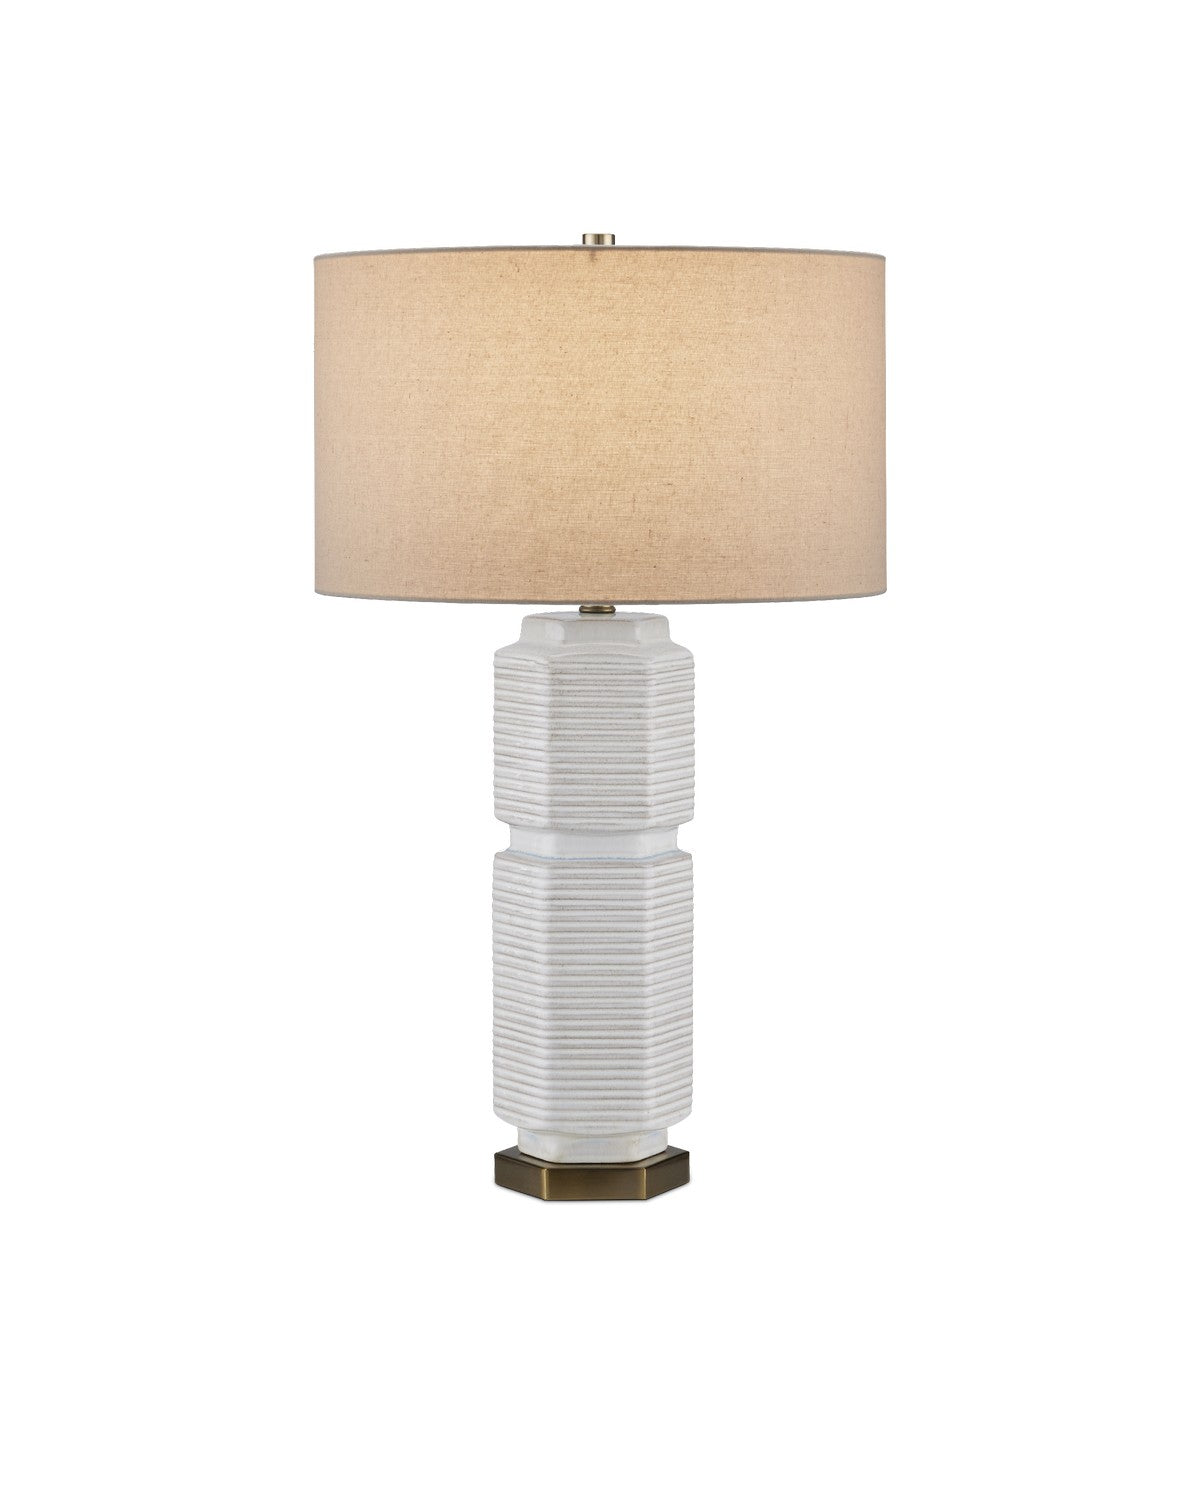 Currey and Company - 6000-0965 - One Light Table Lamp - White/Beige/Blue/Antique Brass